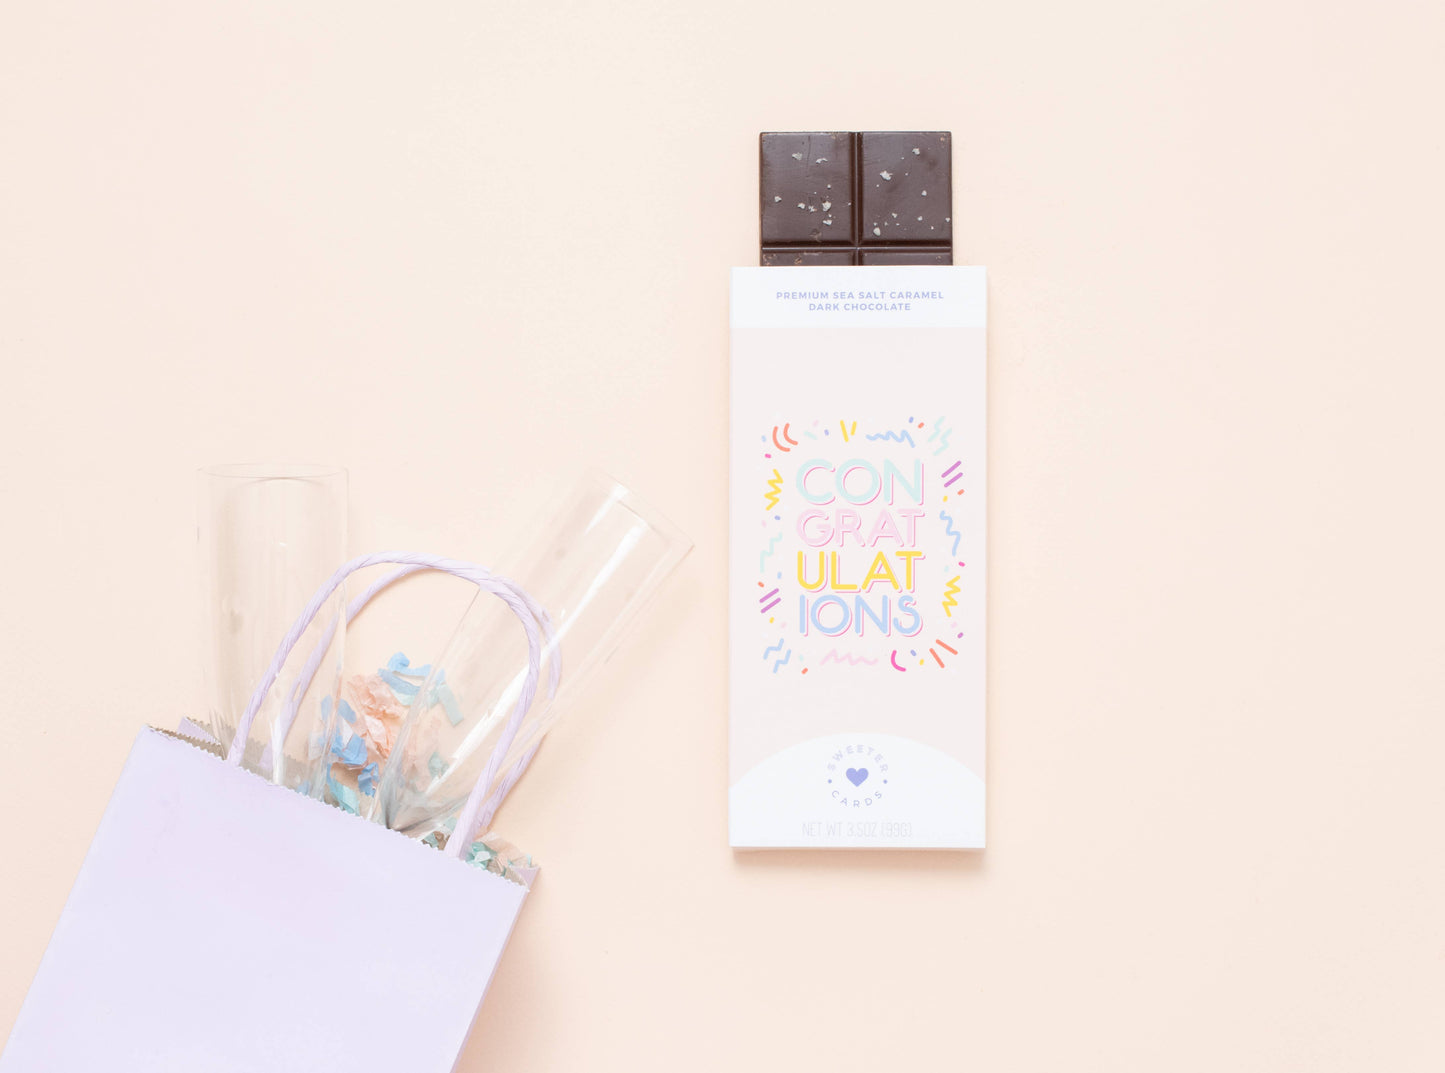 Sweeter Card - Congratulations Chocolate Bar that opens as Greeting Card  Sweeter Cards Chocolate Bar + Greeting Card in ONE!   -better made easy-eco-friendly-sustainable-gifting